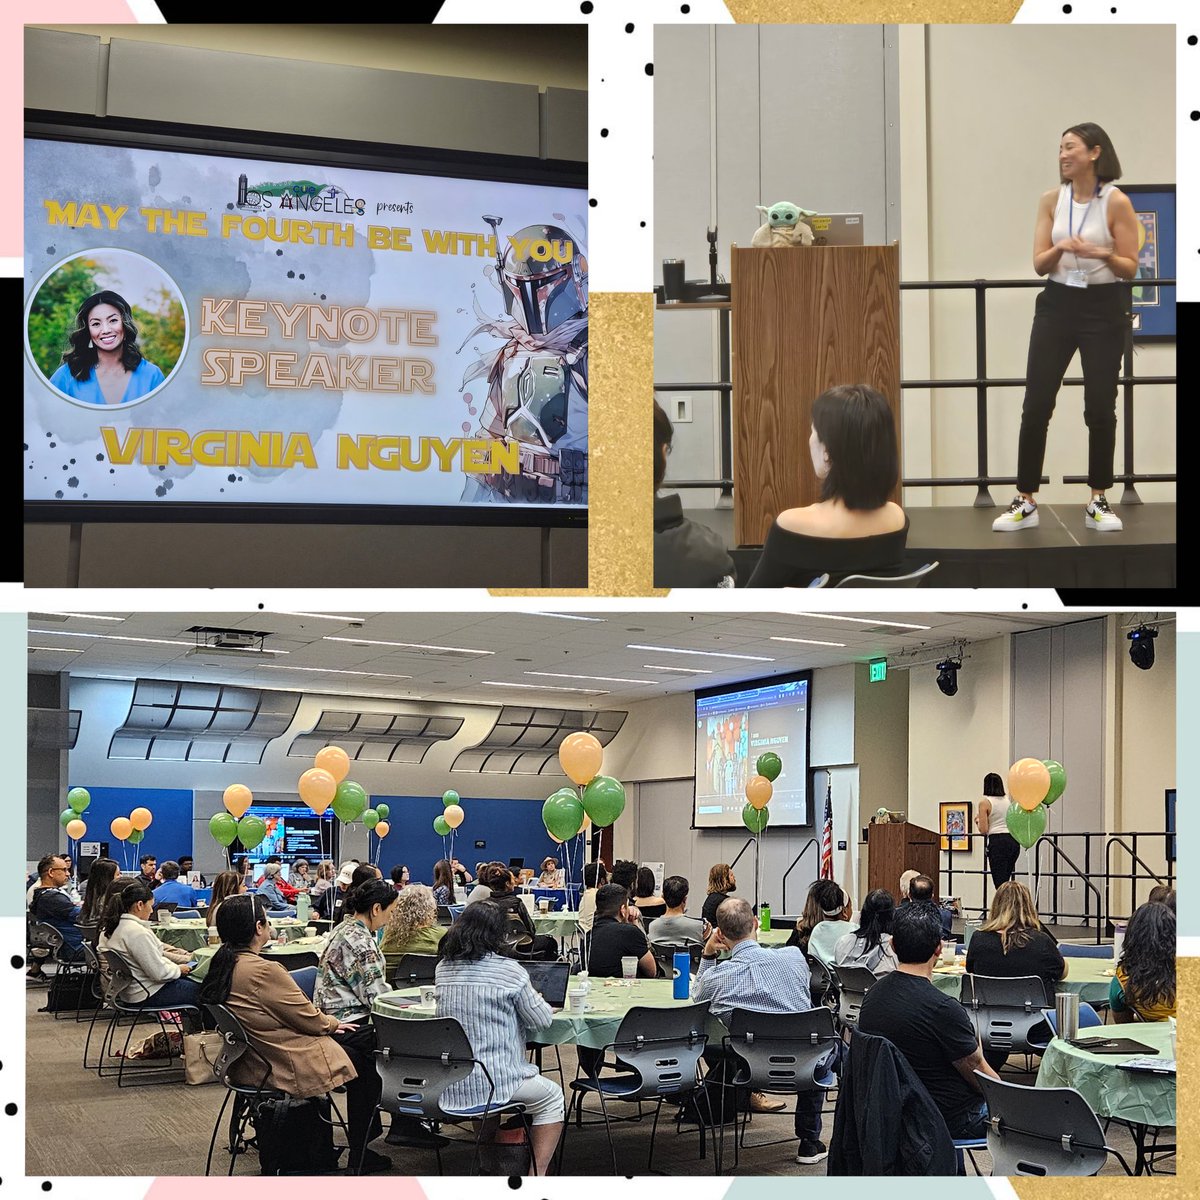 #CUELAPalooza is off to a great start with @VirginiaHNguyen giving a powerful keynote on the Joy of Belonging. @cuelosangeles